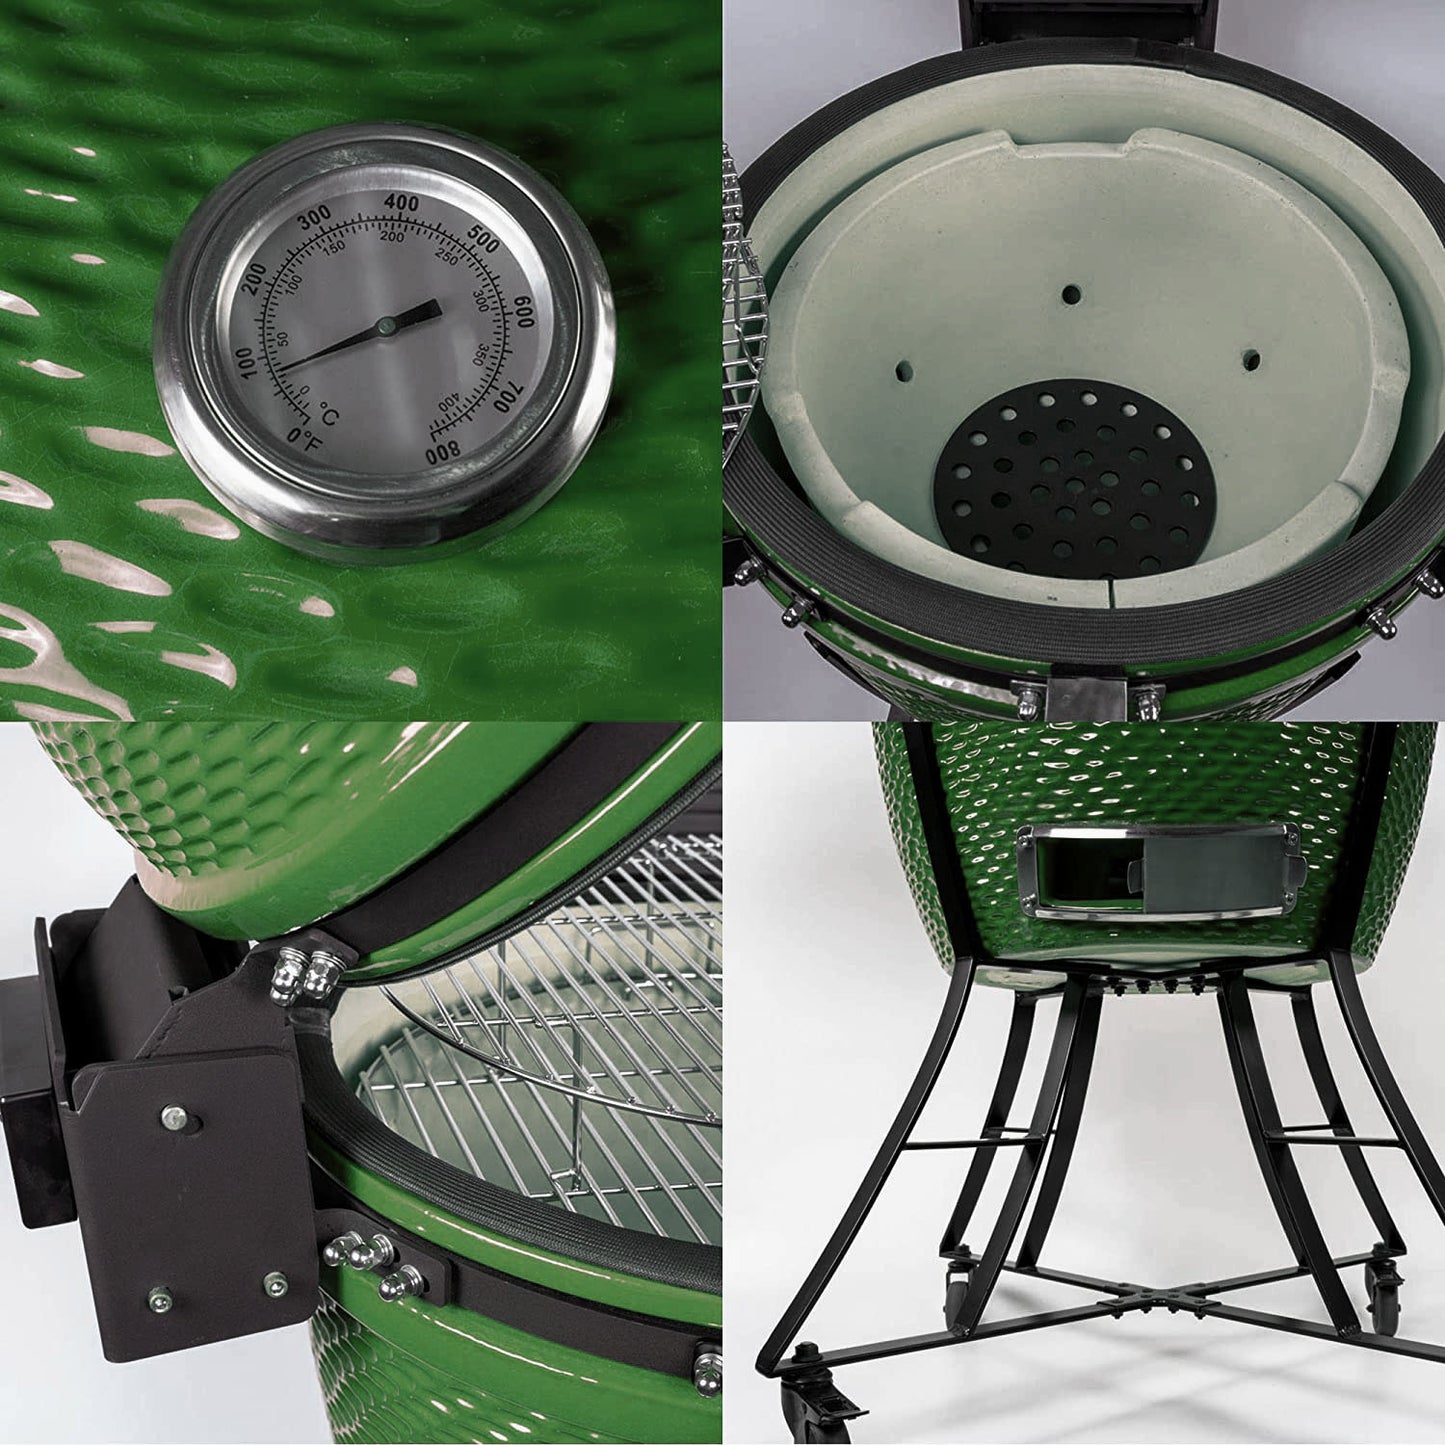 24inch Barbecue Charcoal Grill, Ceramic Kamado Grill with Side Table, Suitable for Camping and Picnic, GREEN